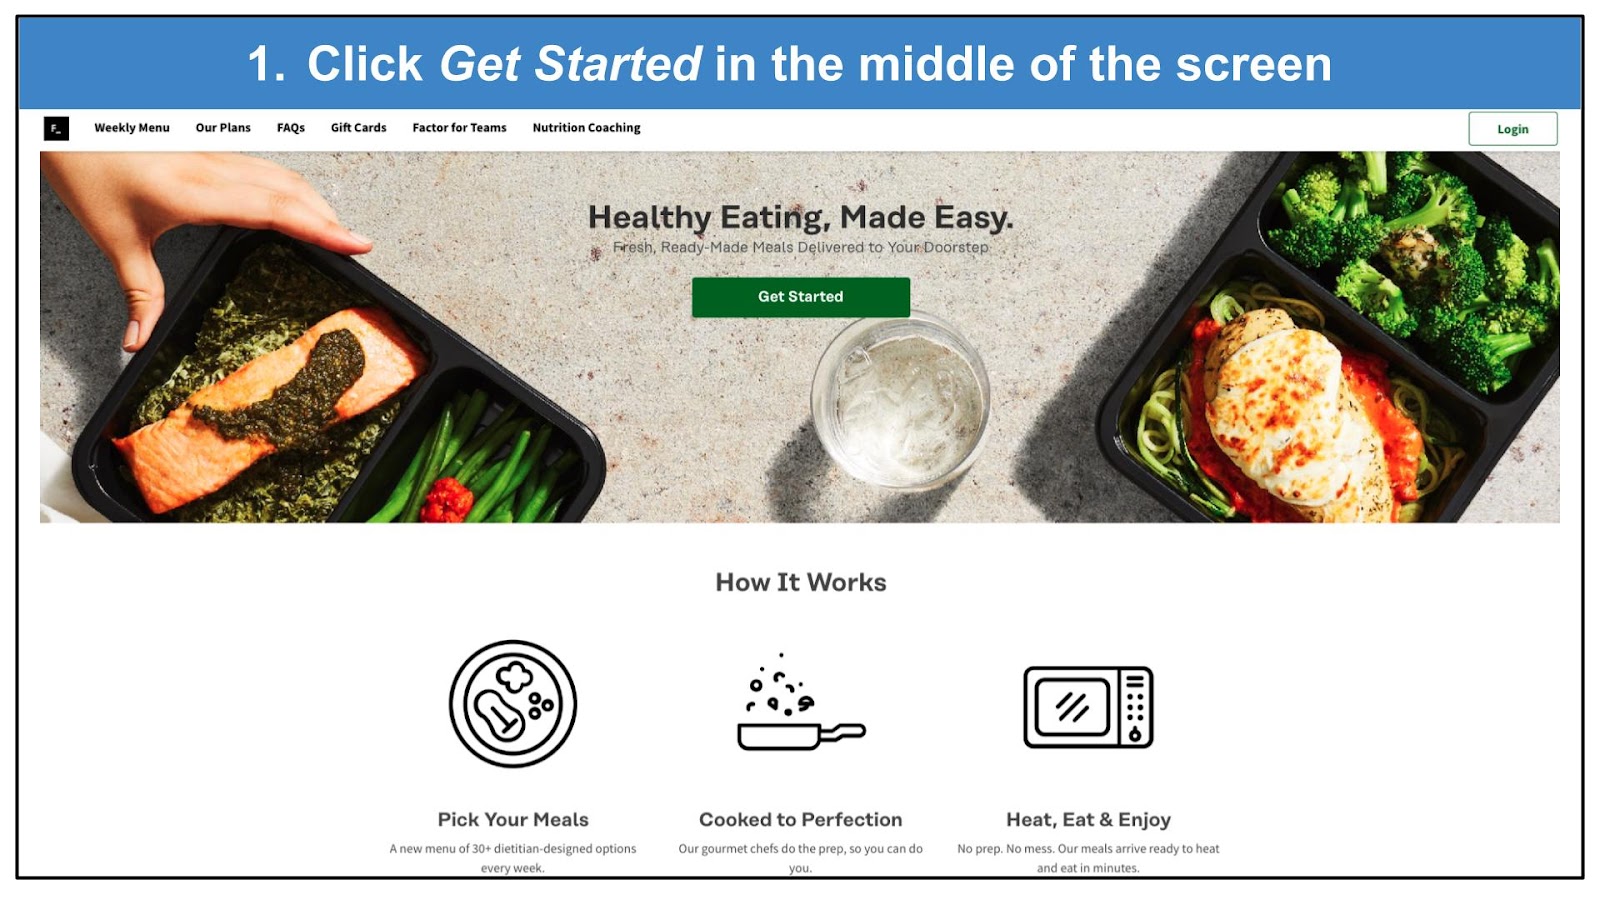 Factor Menus and Plans - Prepared Meal Delivery Service